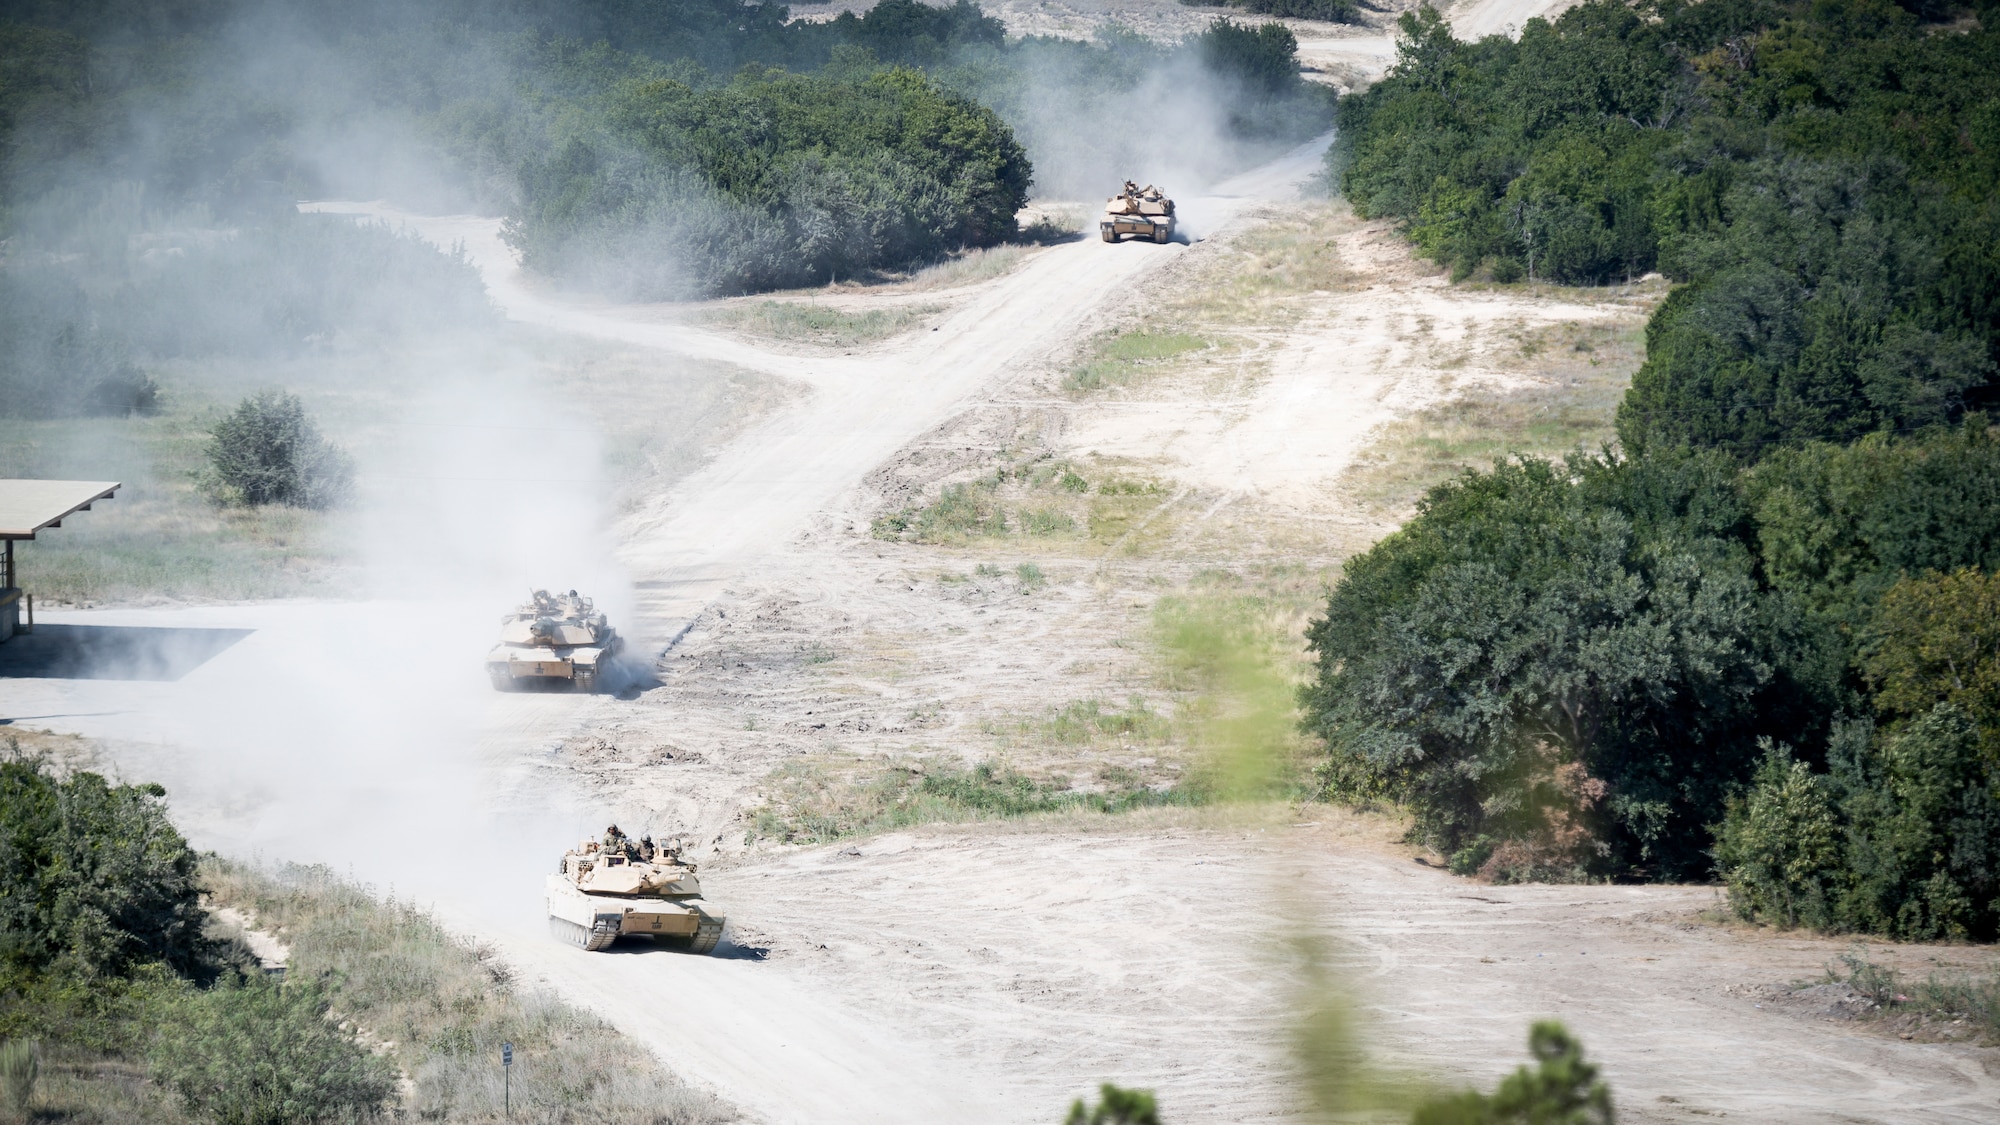 Three U.S. Army M1 Abrams tanks drive down a road during Exercise Pegasus Forge at Fort Hood, Texas, Aug. 11, 2020. The event took 45 days in the field leading up to the last full day filled with a fires coordination exercise. (U.S. Air Force photo by Senior Airman Lillian Miller)